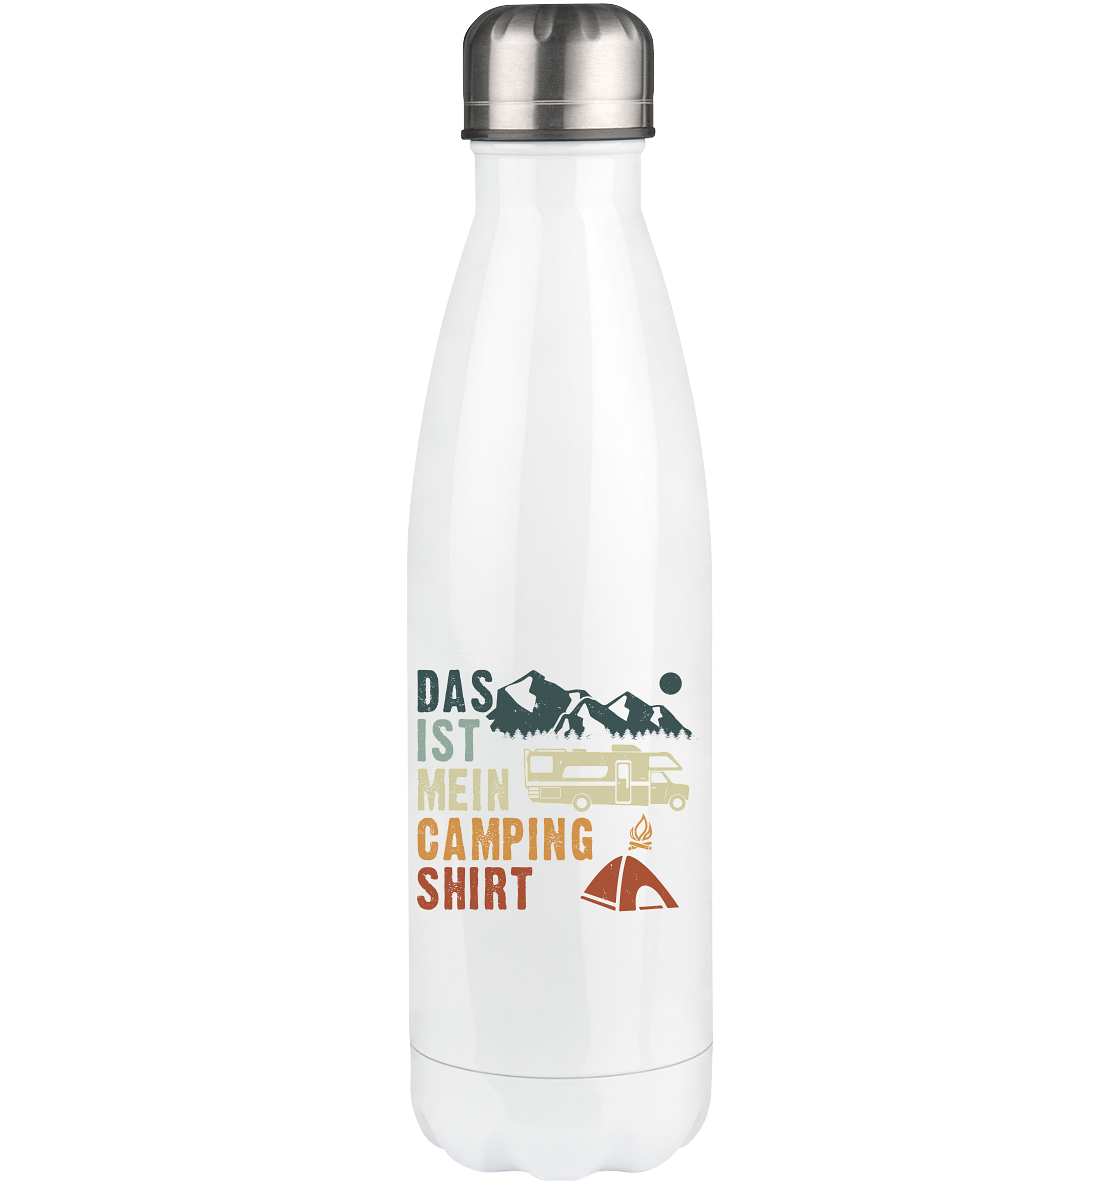 Das ist mein Camping Shirt - Edelstahl Thermosflasche camping UONP 500ml